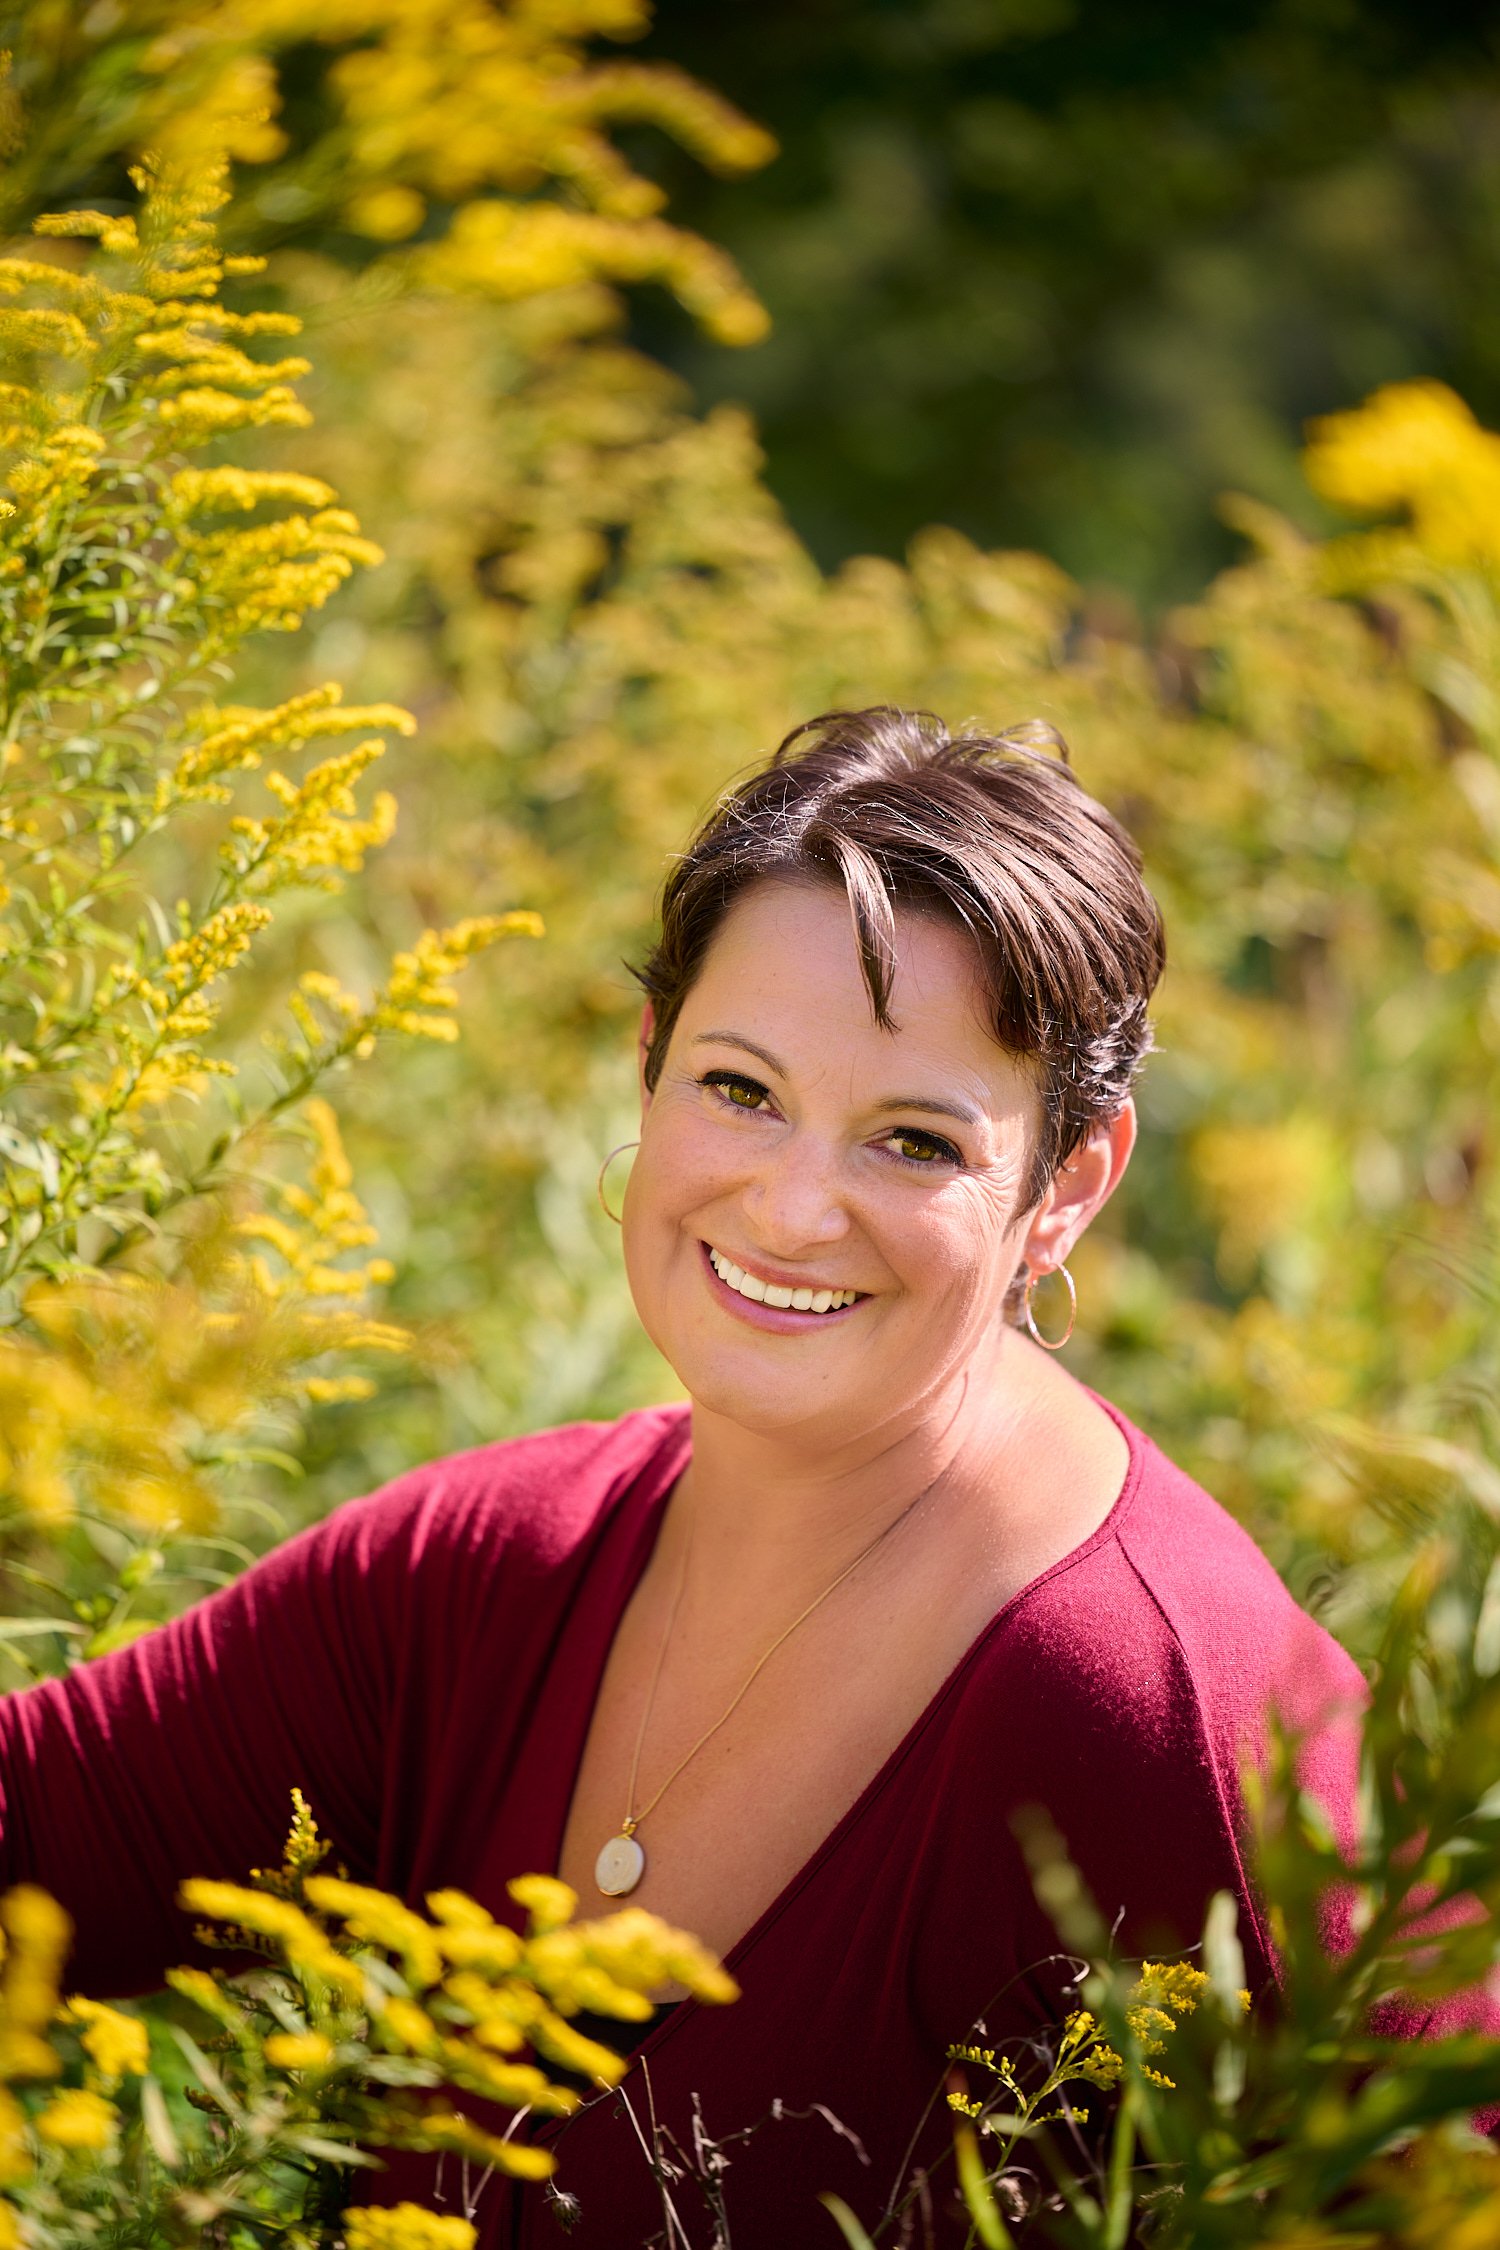  Rachael Zito is posing for business headshots and personal branding portraits on a warm sunny day in the park. She is smiling wide and standing in the tall grass and by a tree wearing a v-neck blouse 